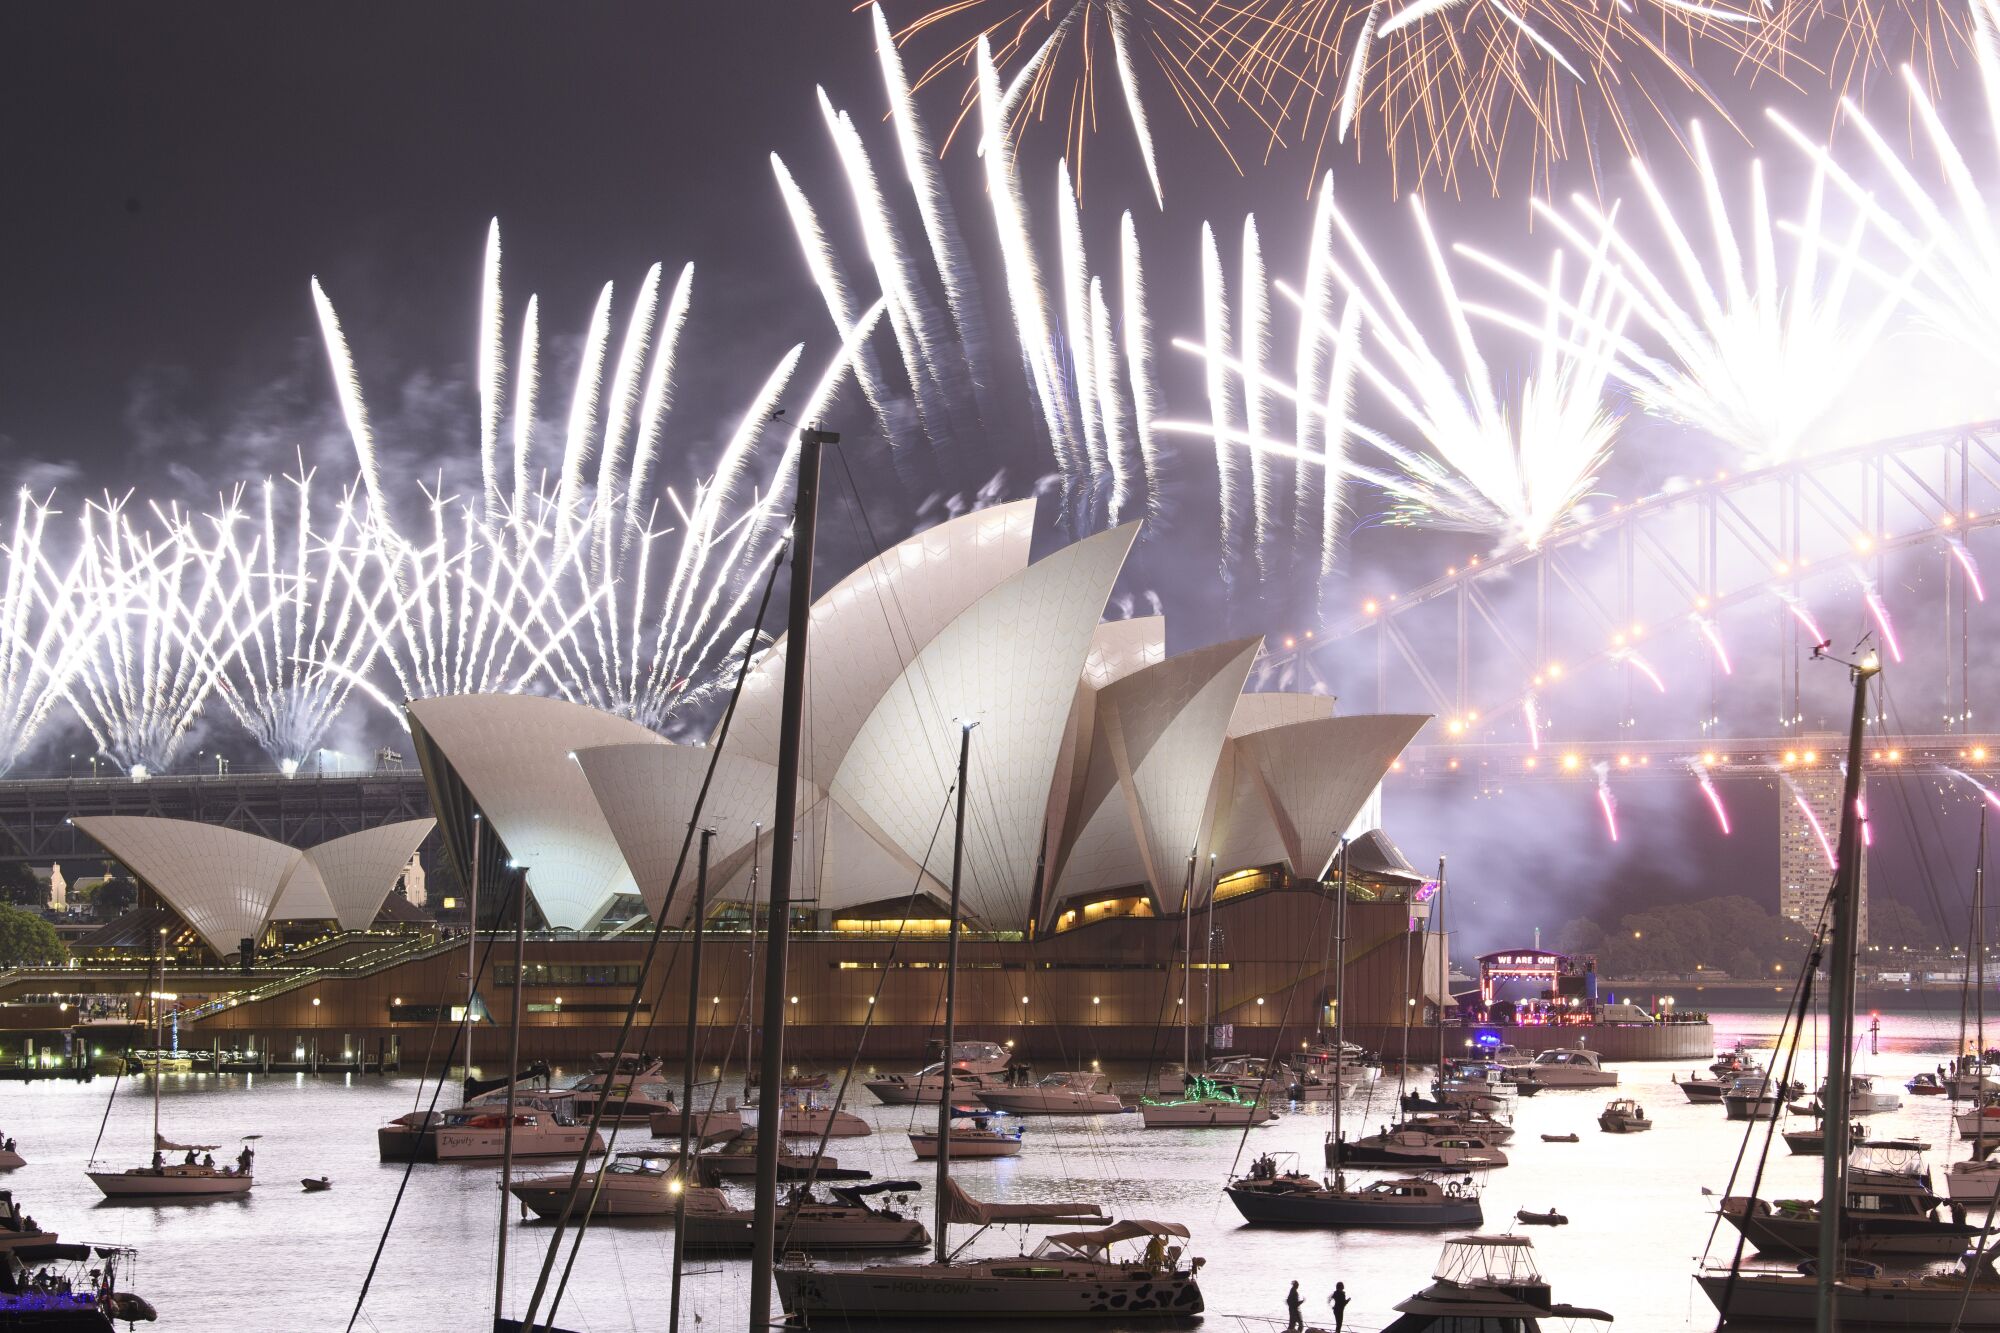 Boats are spaced around Sydney harbor as fireworks explode overhead.